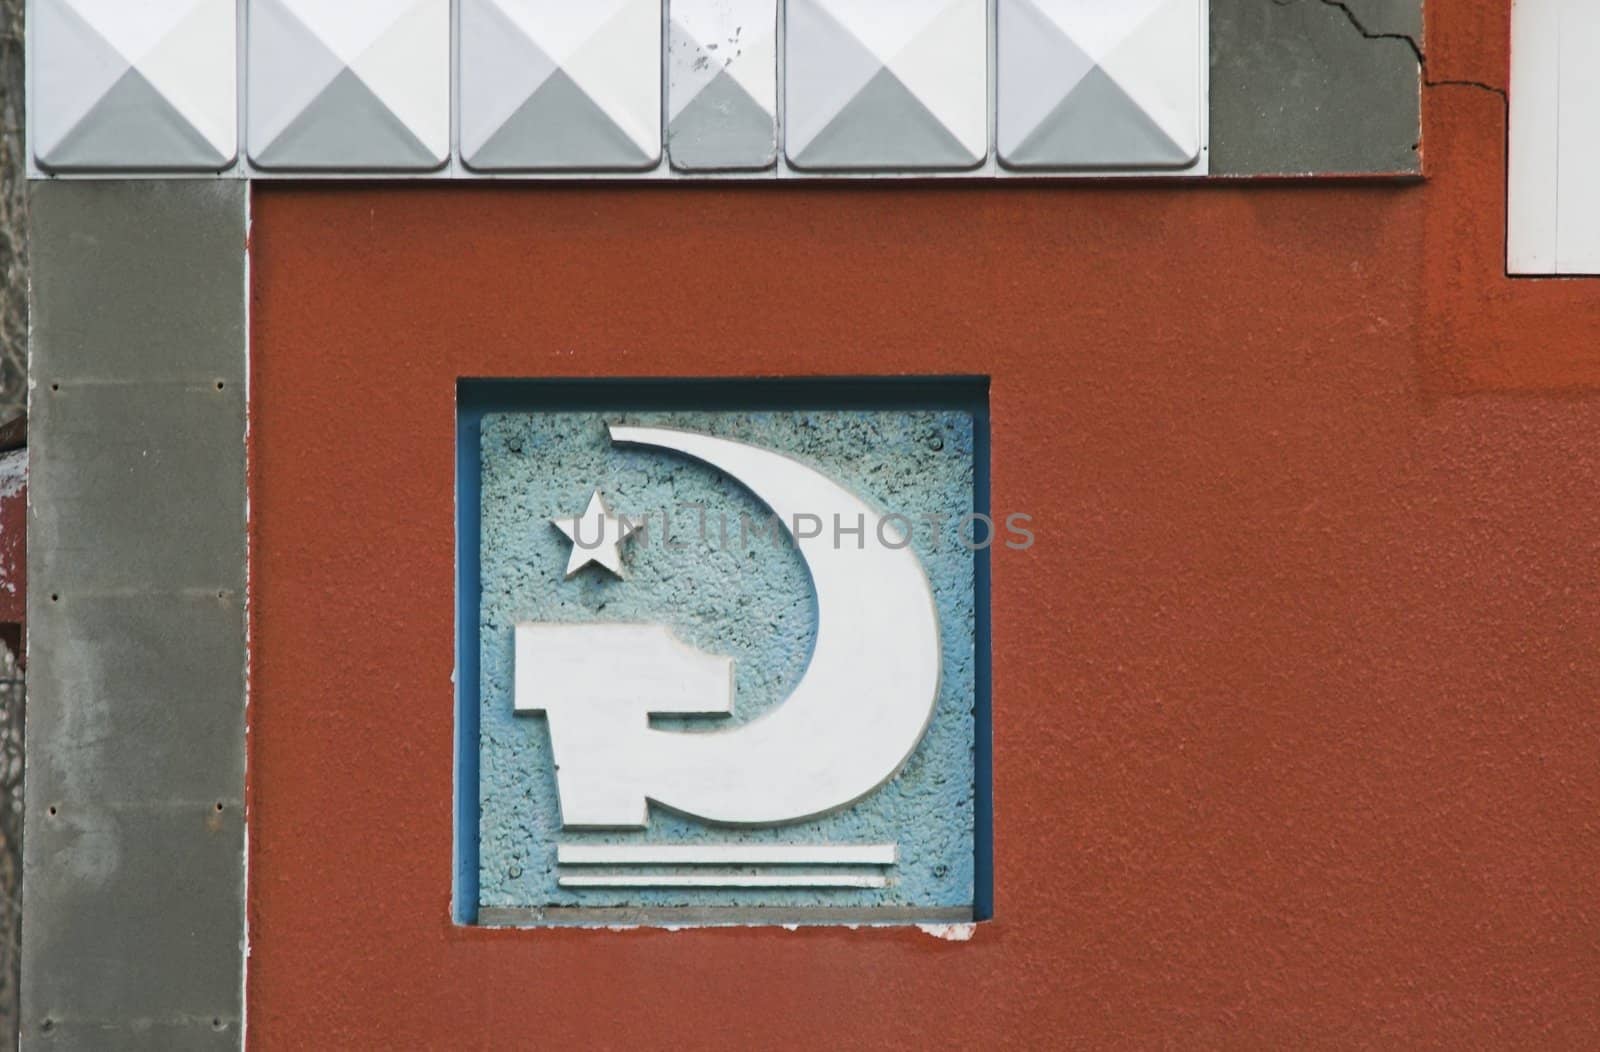 Soviet-style decorative detail on a building wall.